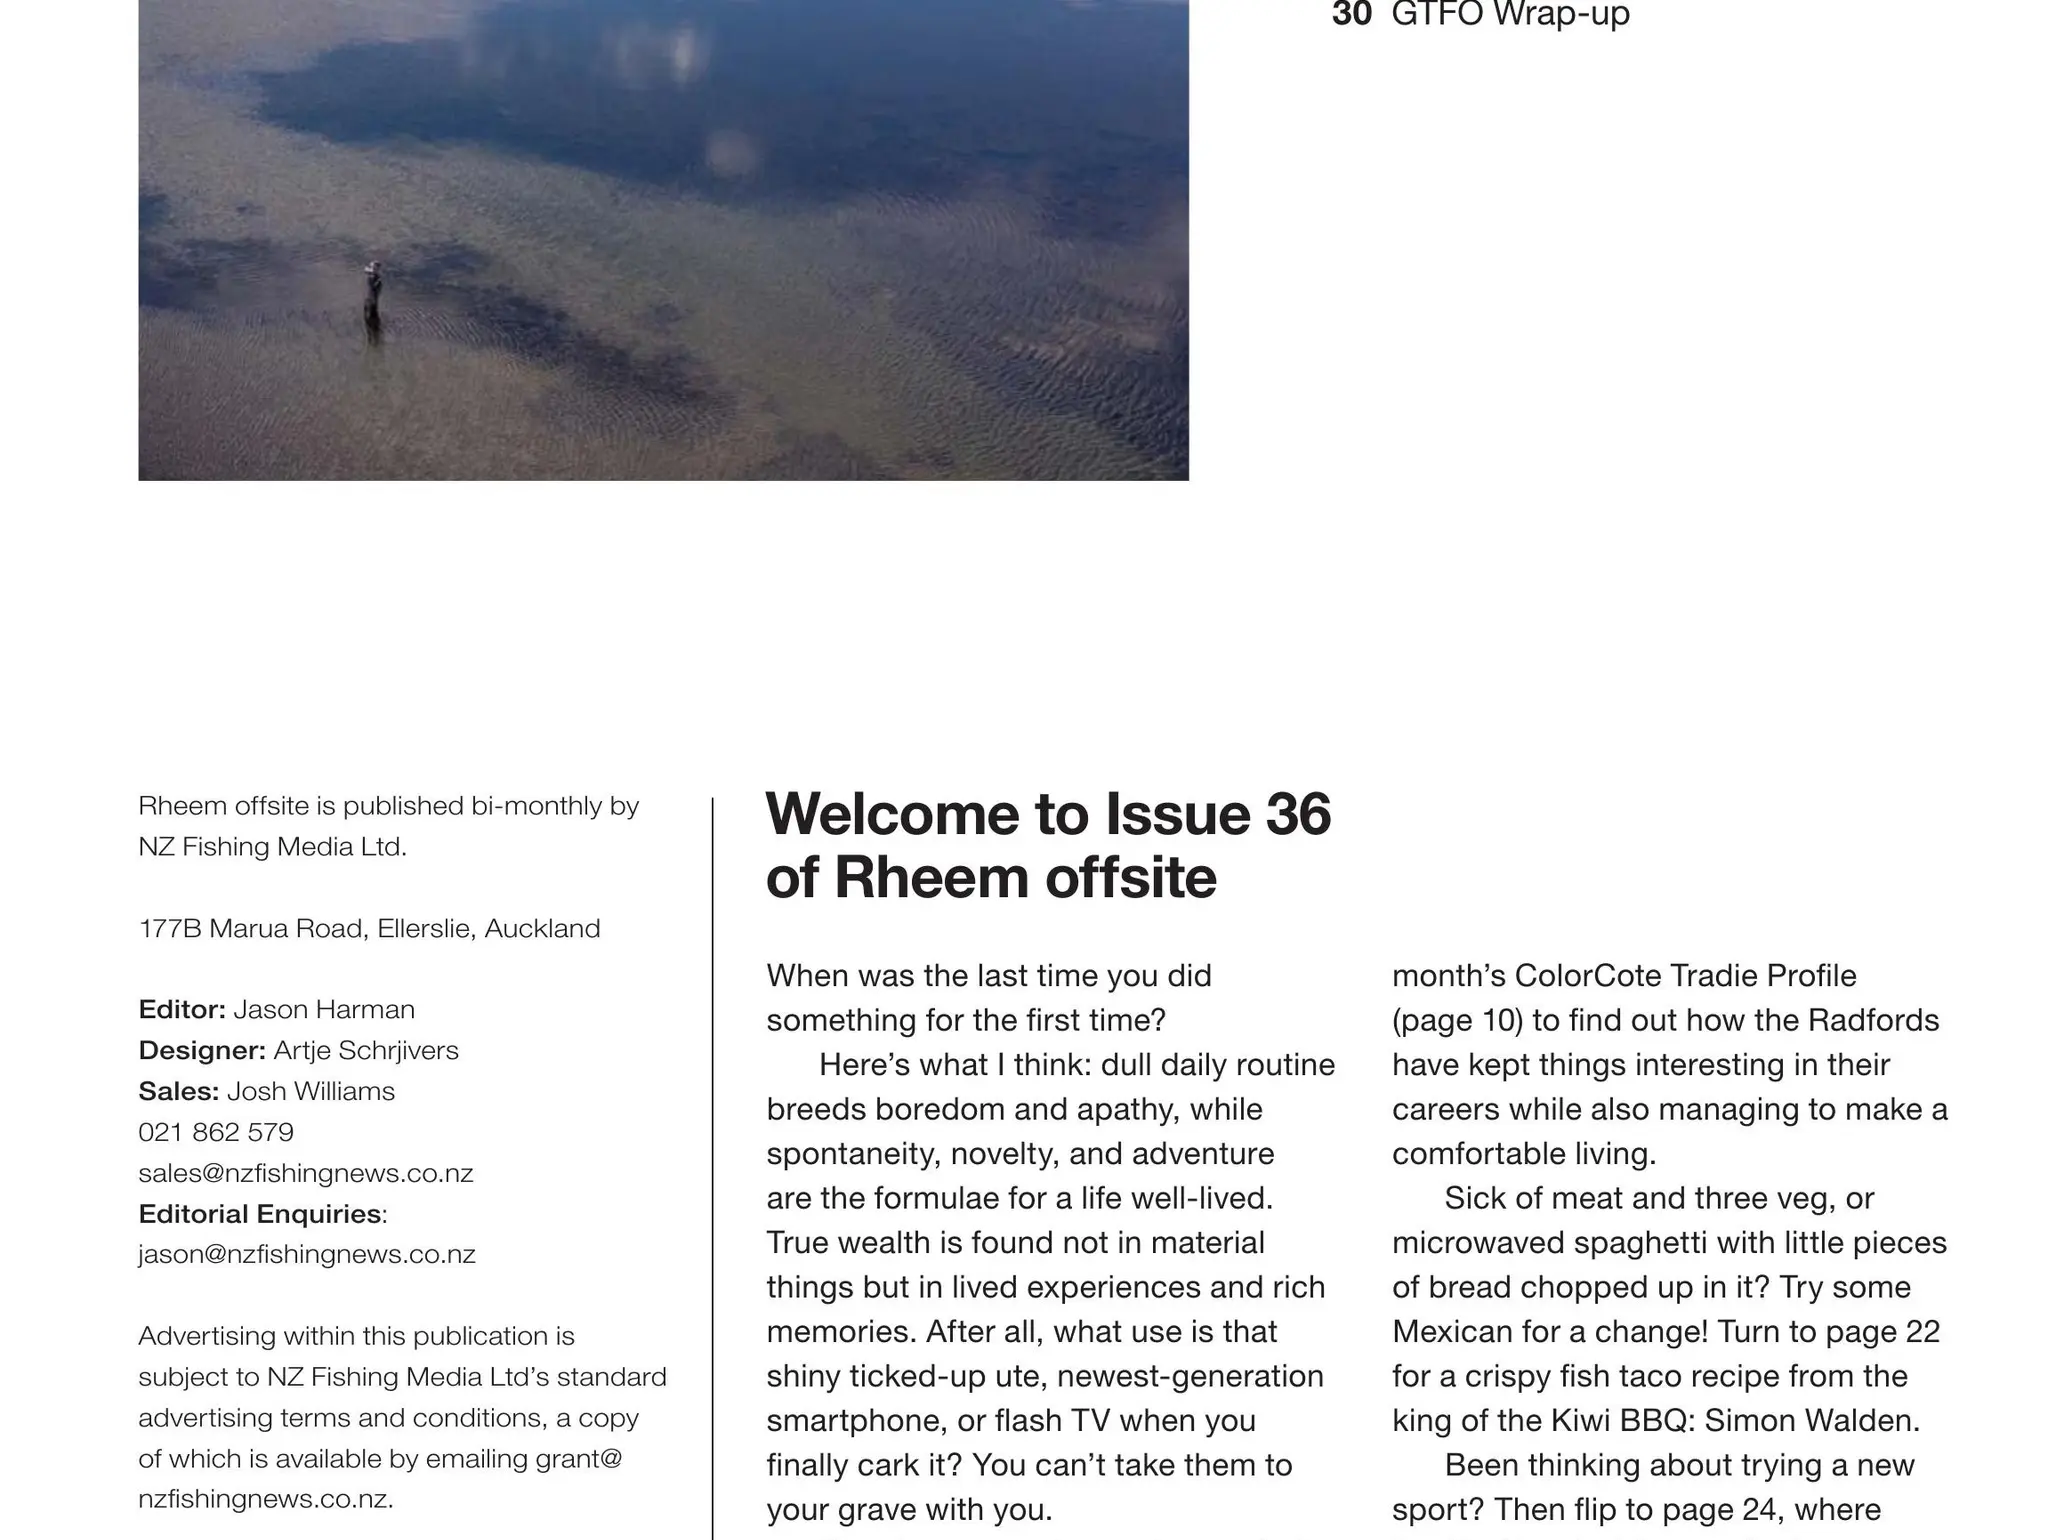 Welcome to Issue 36 of Rheem offsite